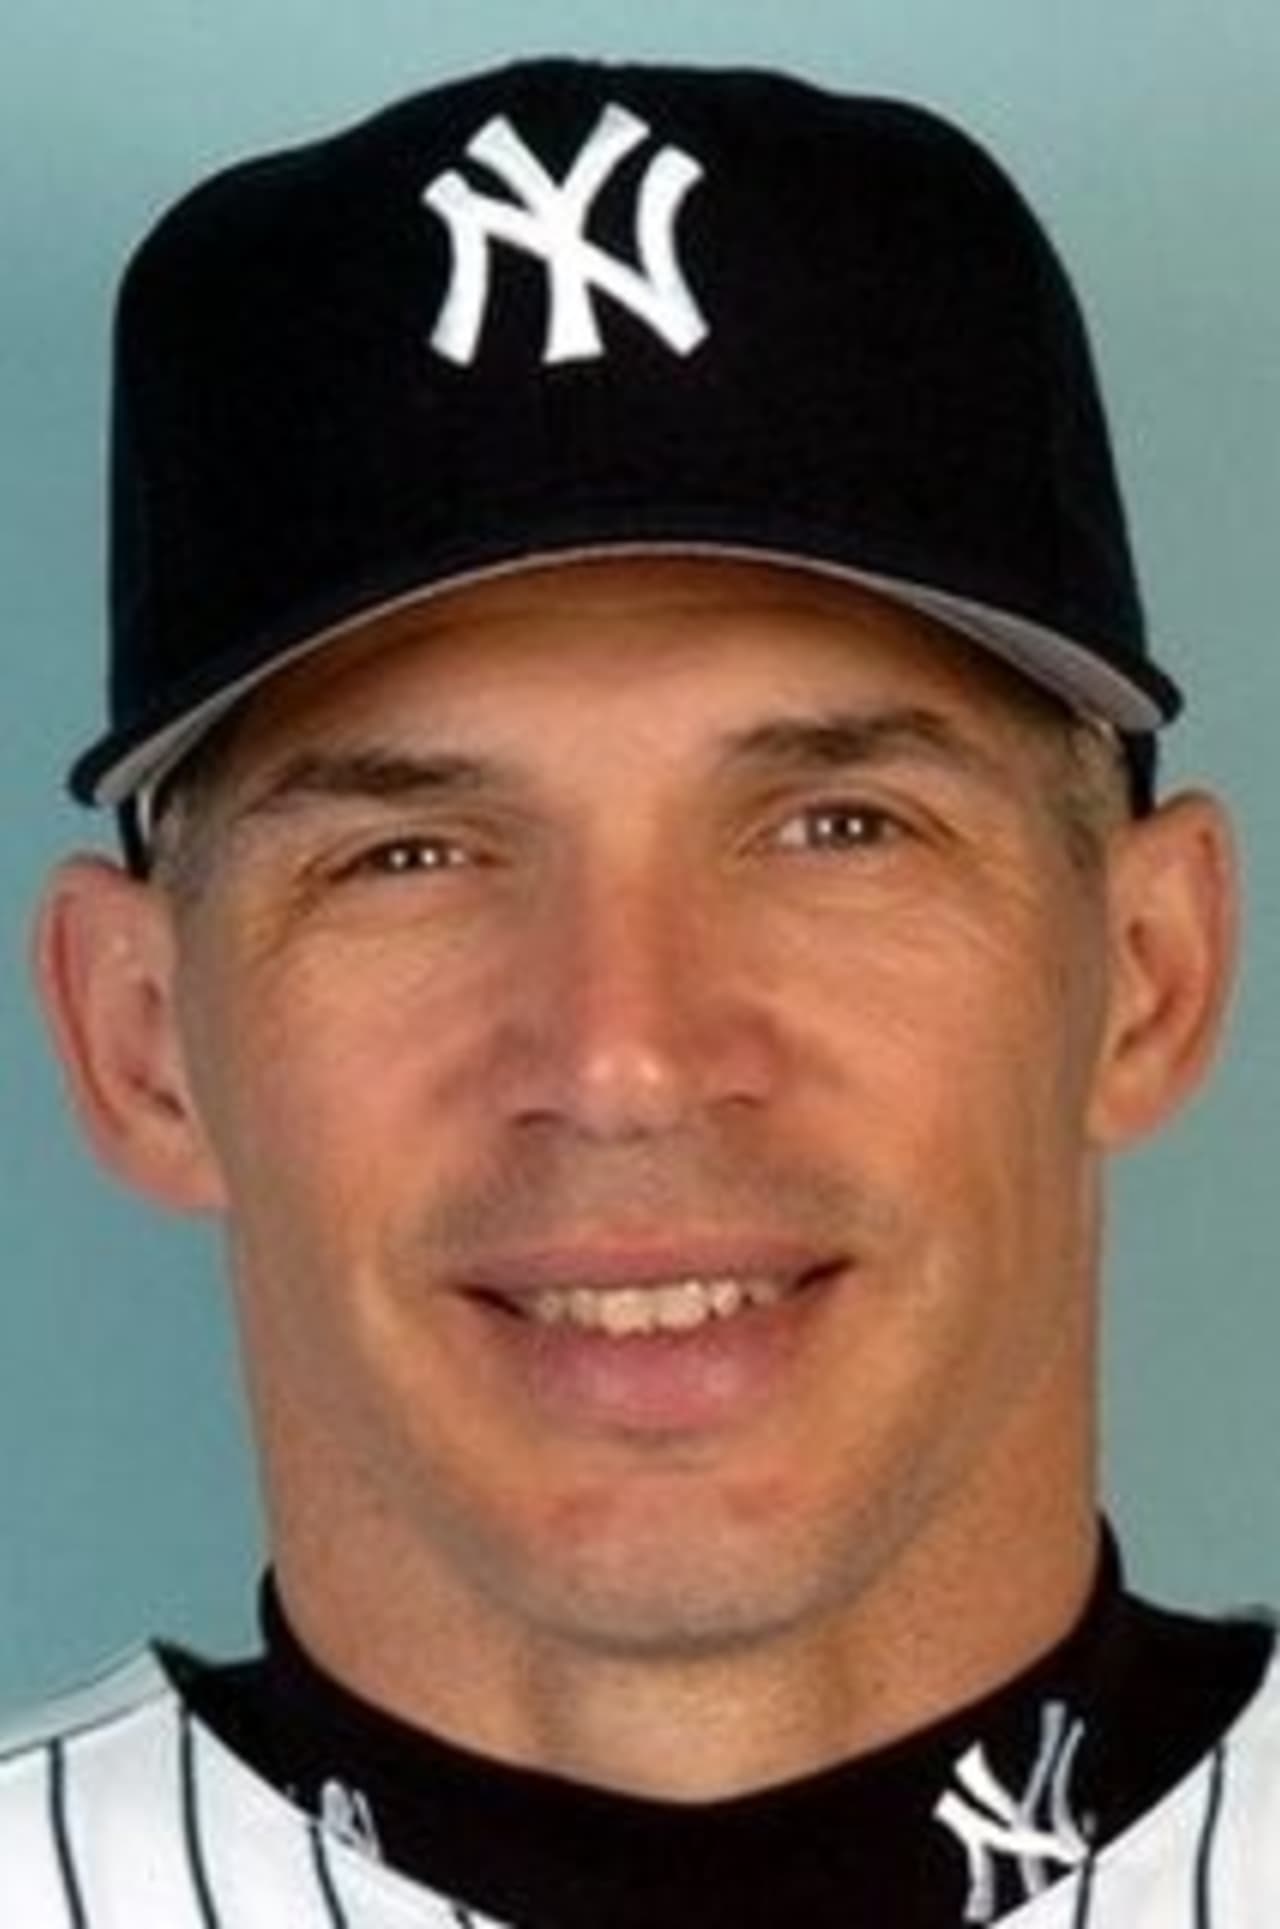 Joe Girardi's new app, "Portalball" comes out in August. 